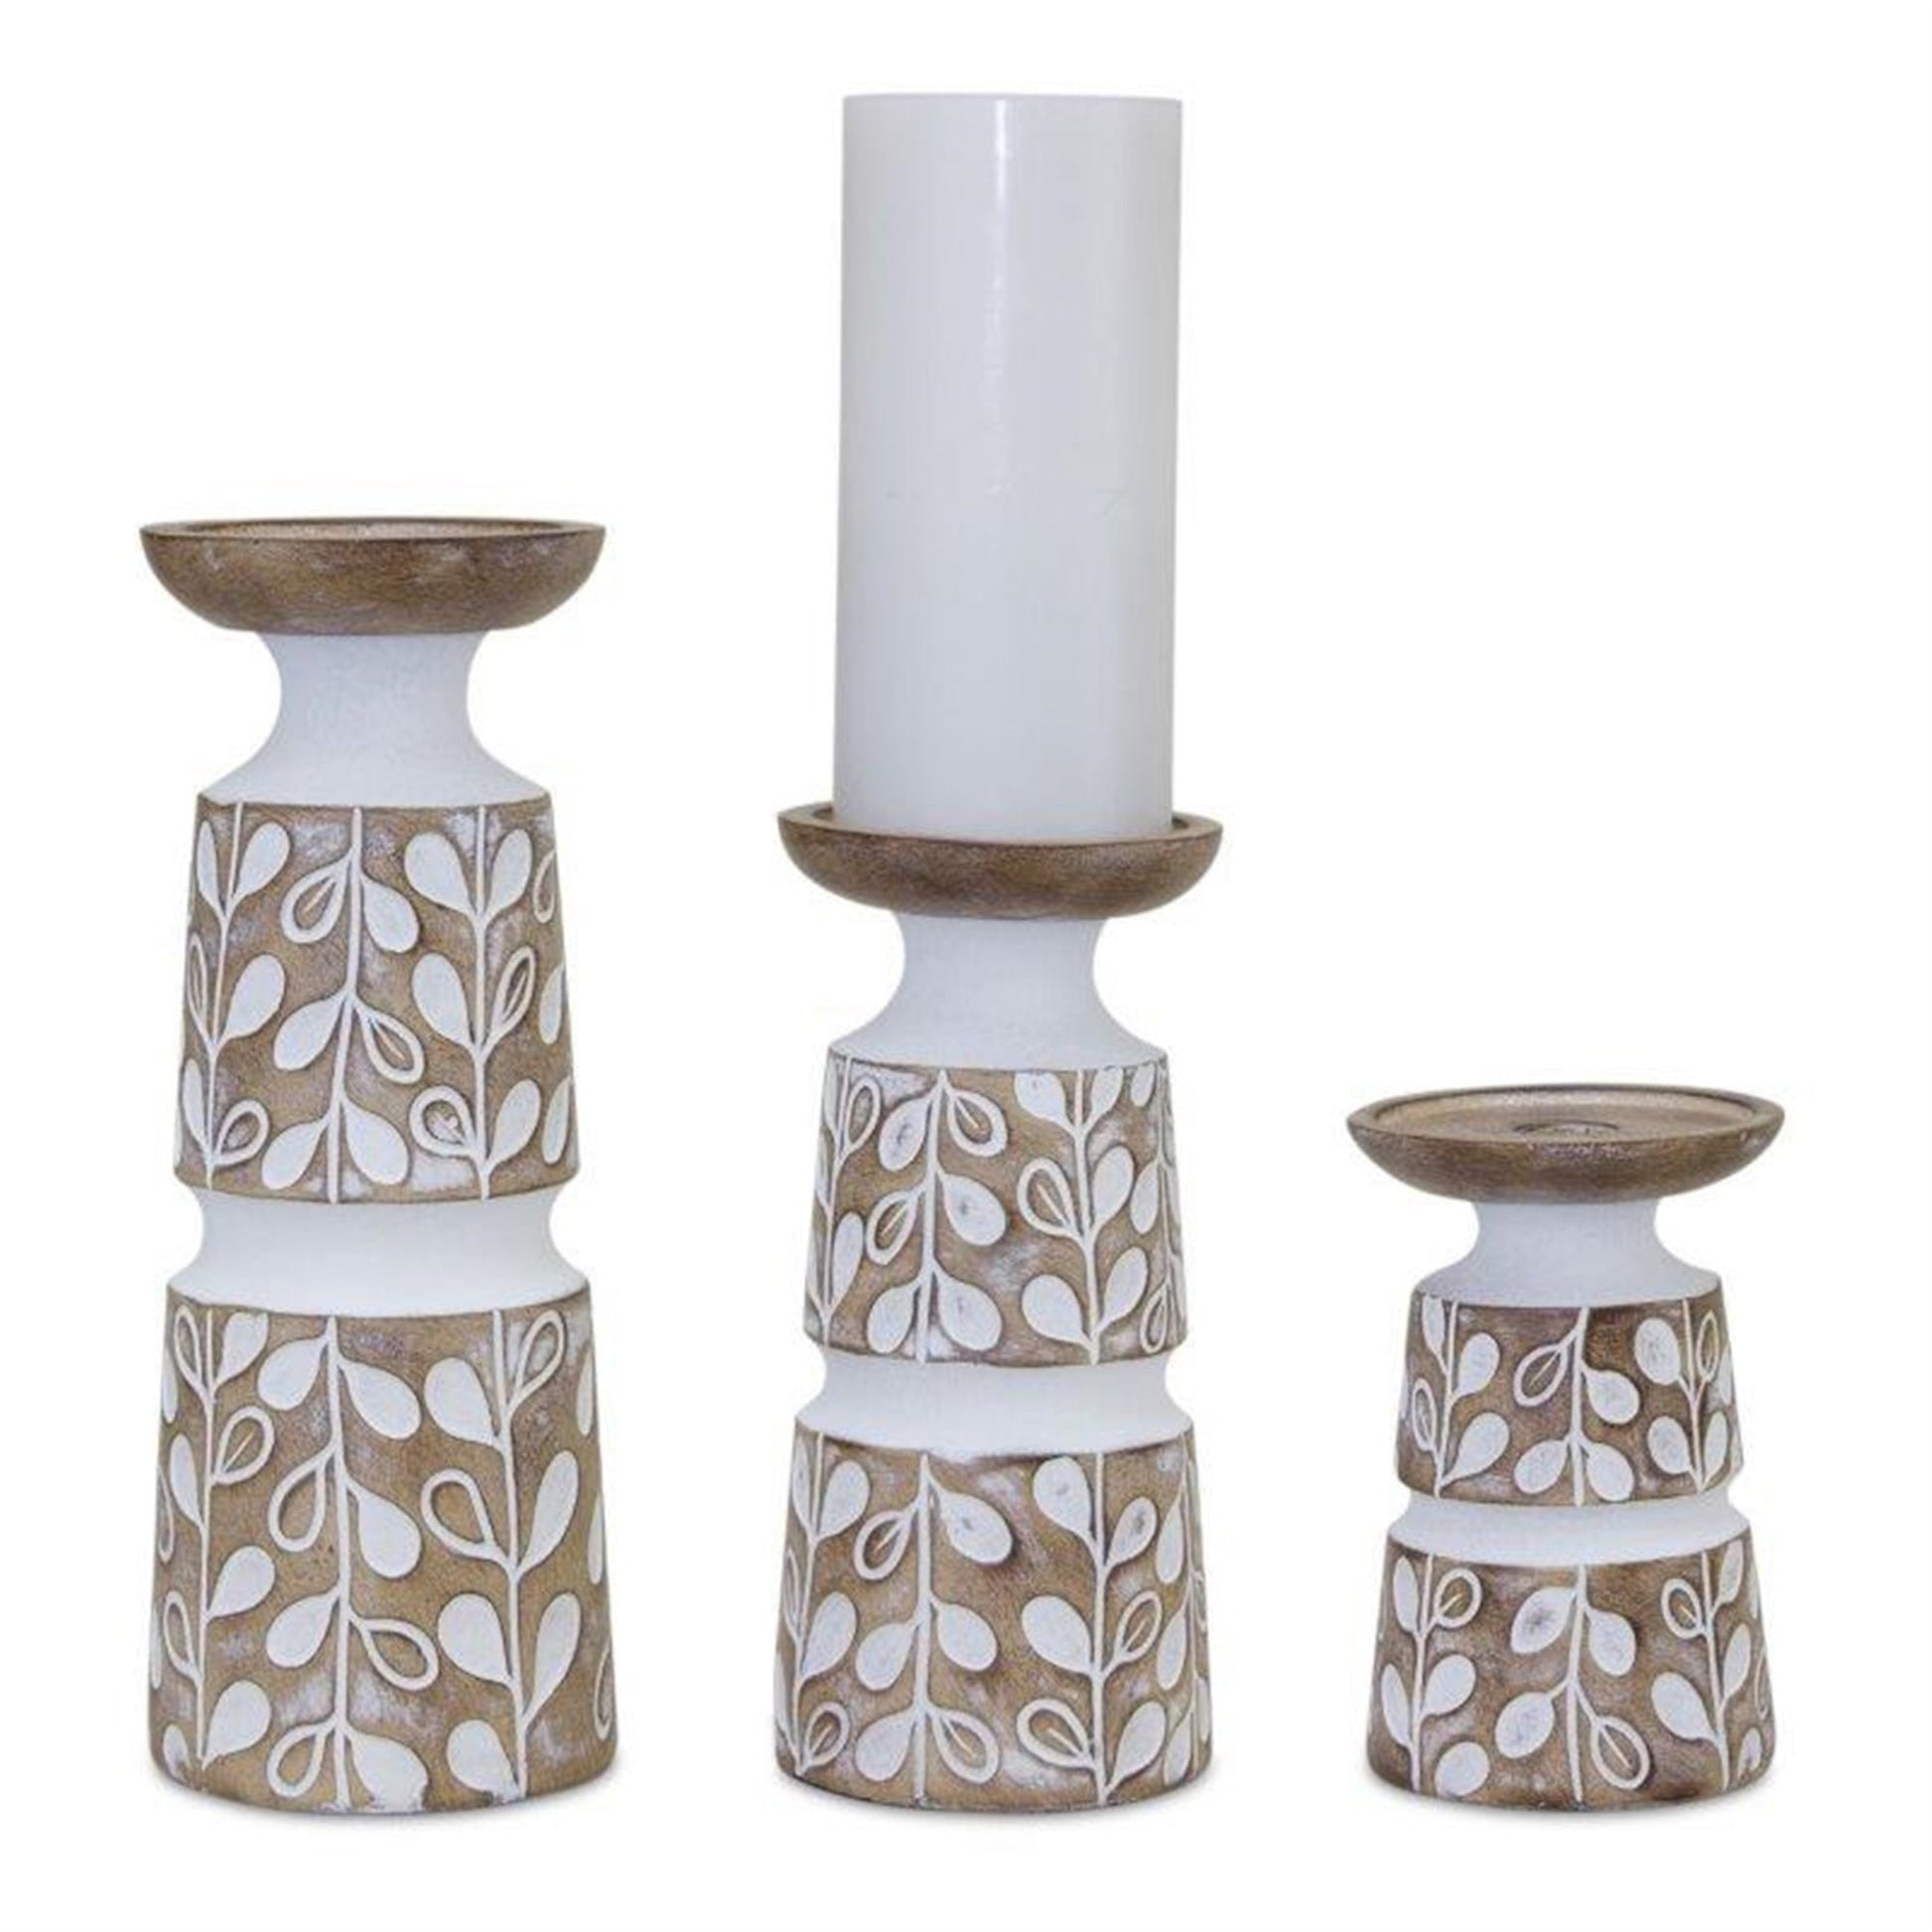 Rustic Leaf Pattern Candle Holders (Set of 3)